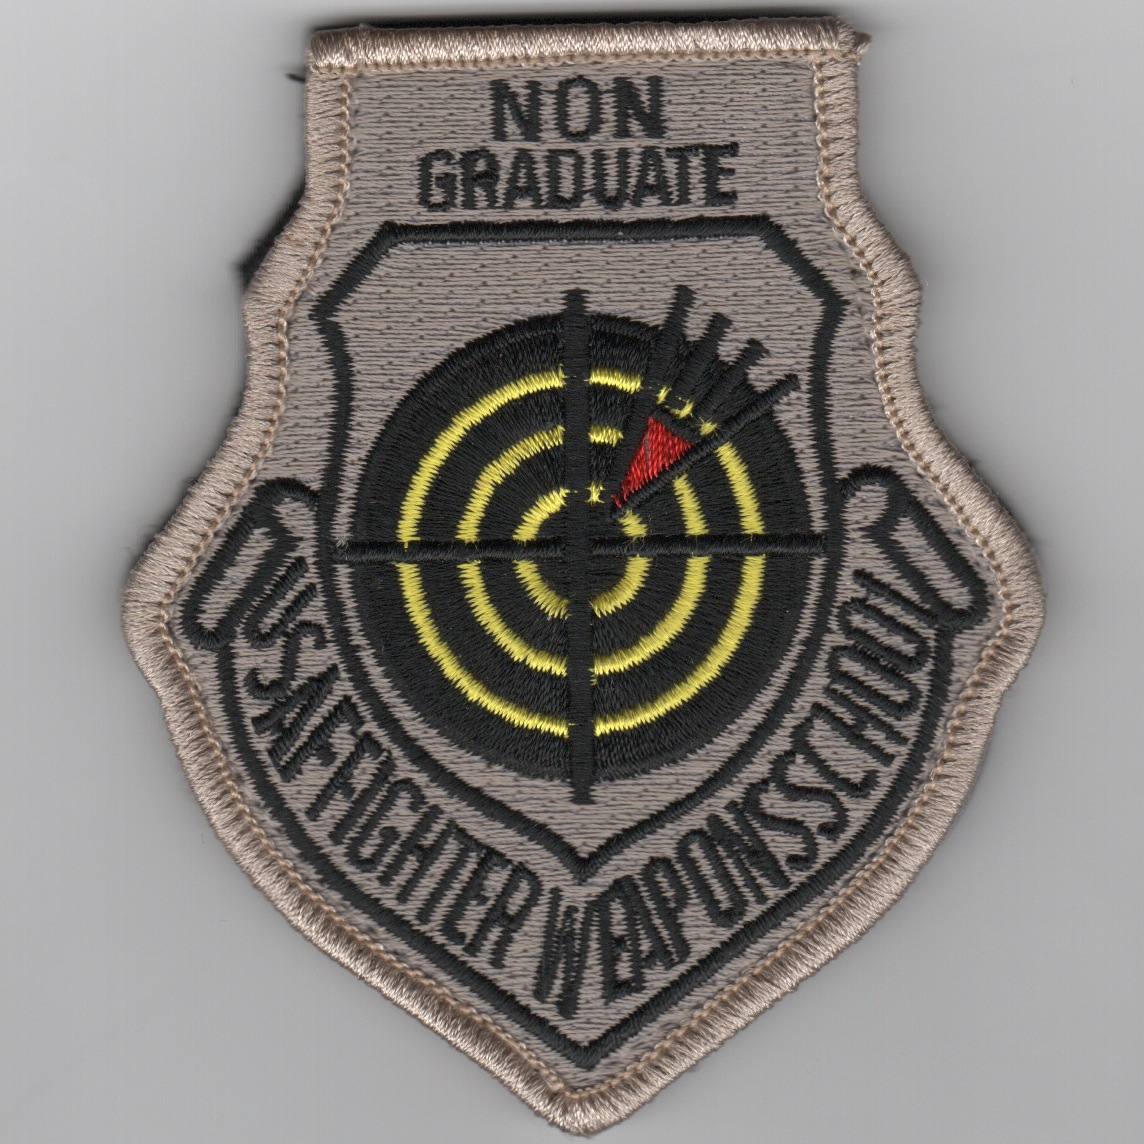 USAF FIGHTER Weapons School NON-Graduate Patch (No Velcro)